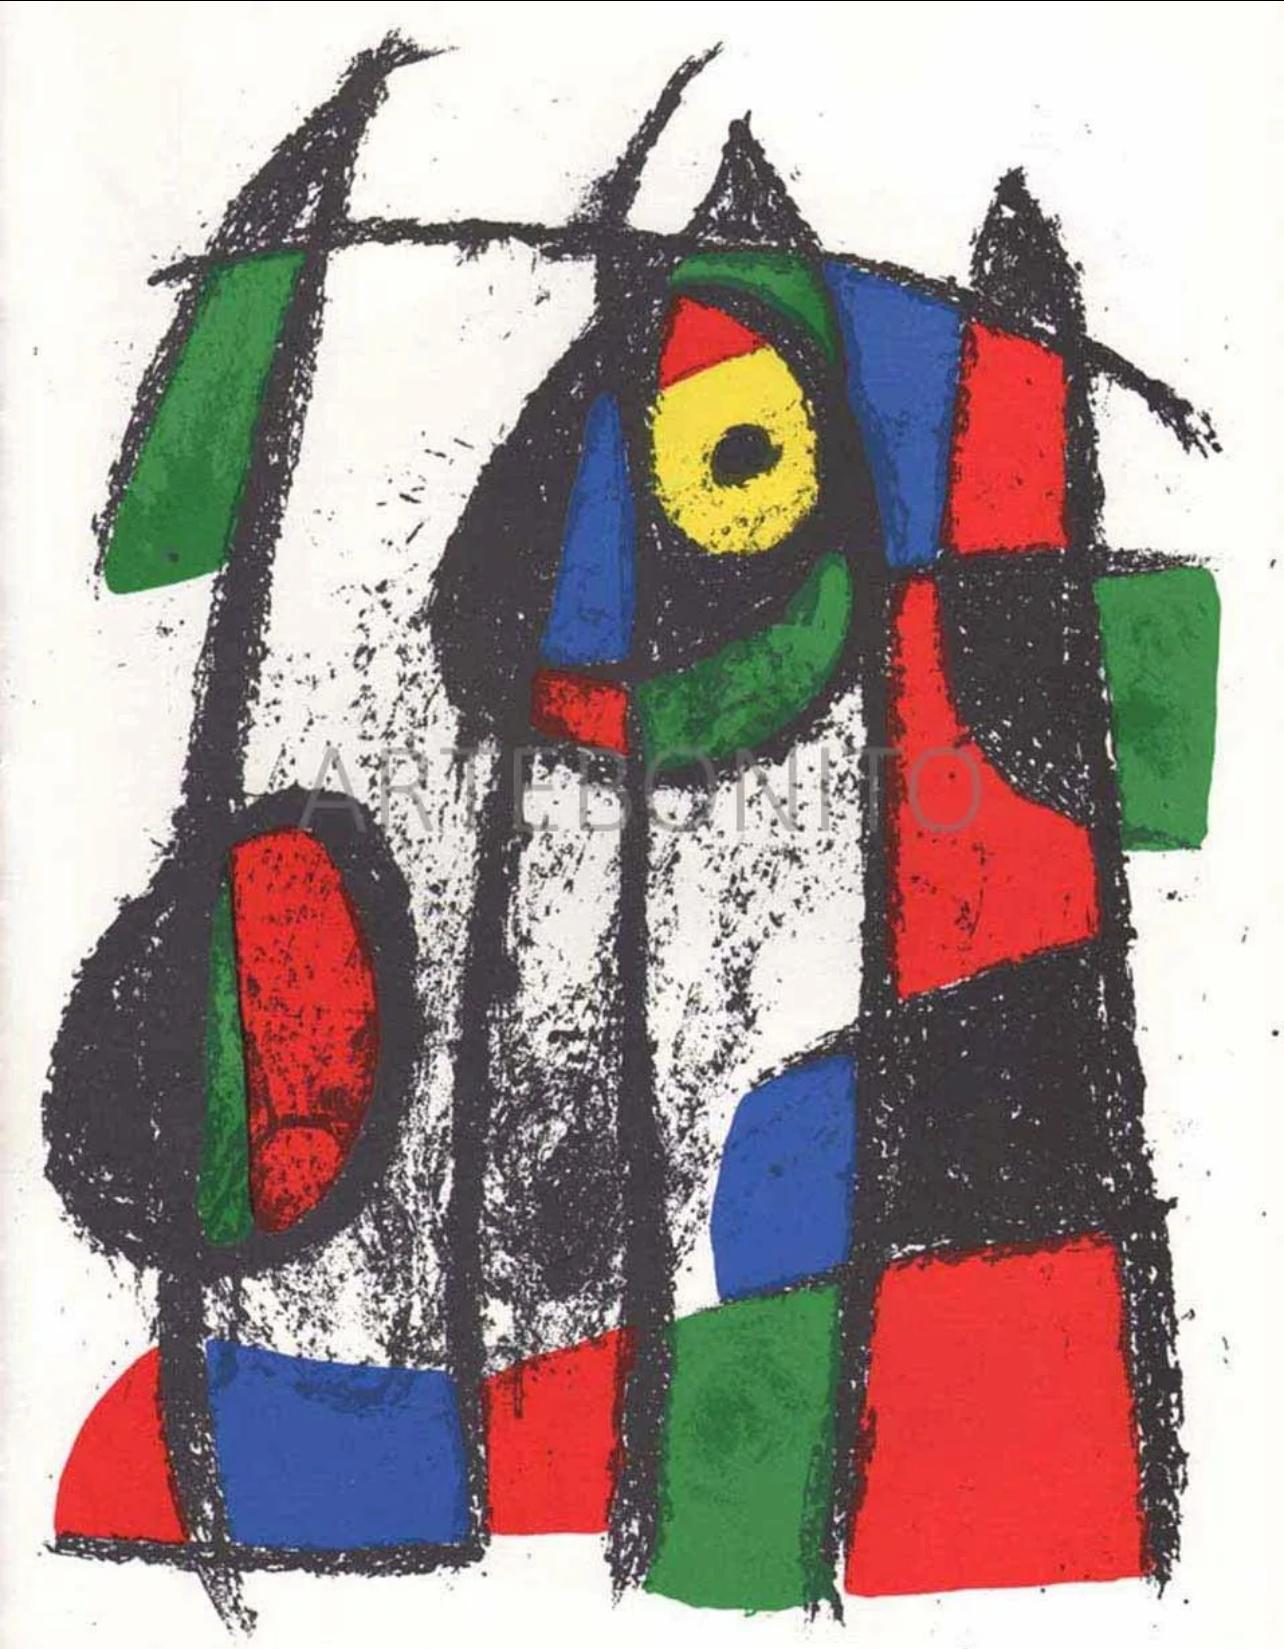 Joan Miró Abstract Print - Miro, Composition (Mourlot 1043), 1975 (after)